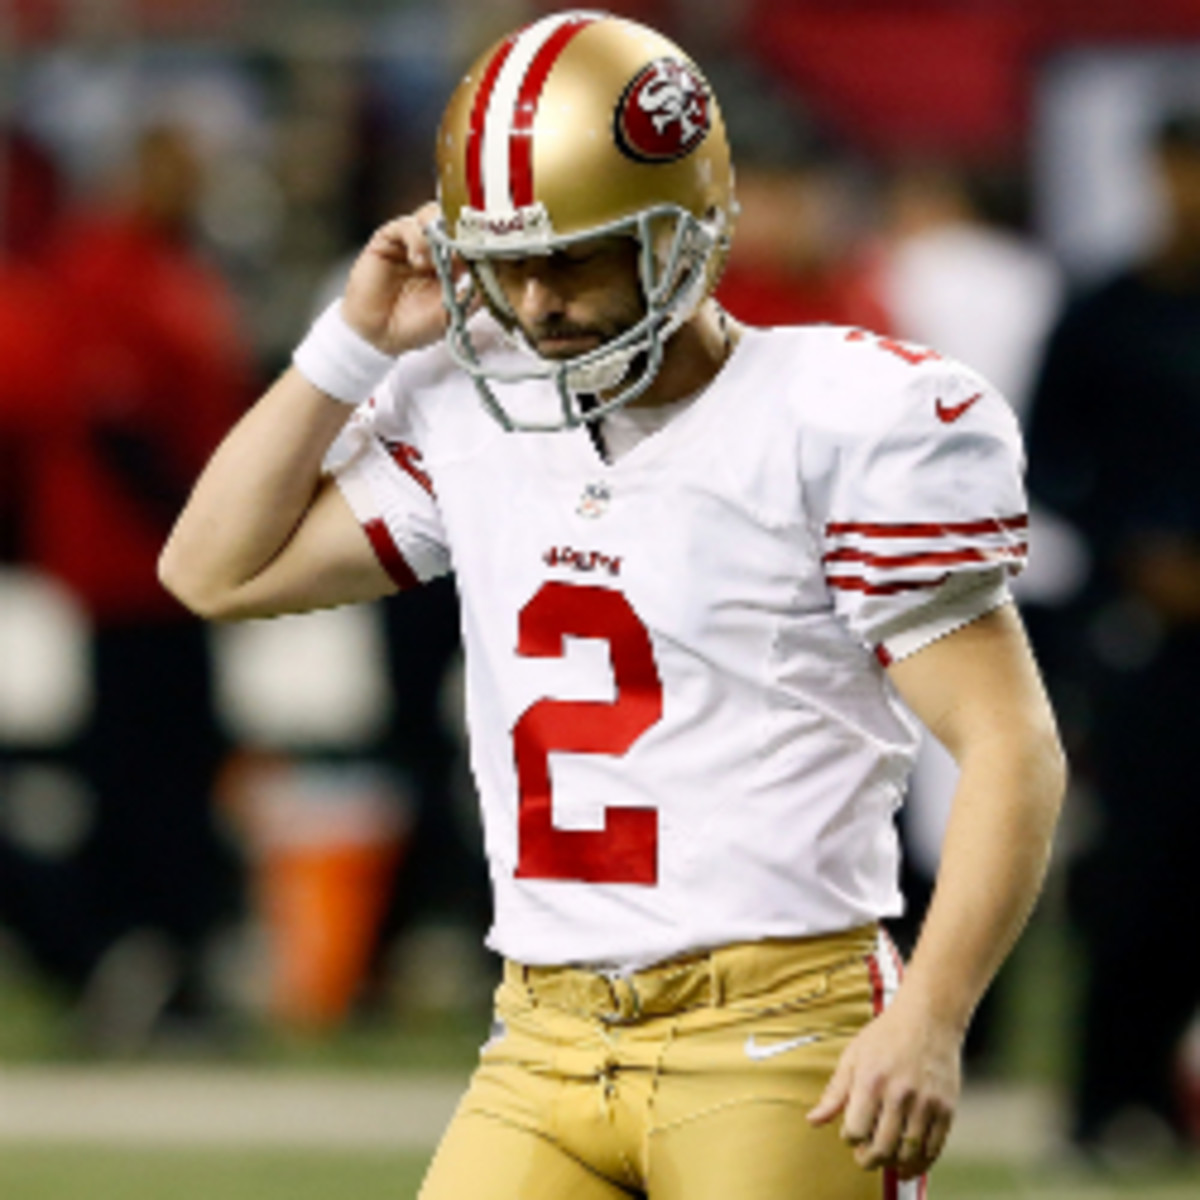 David Akers missed 13 field goals in the regular season, but the 49ers are sticking with him as kicker in the Super Bowl. (Kevin C. Cox/Getty Images)